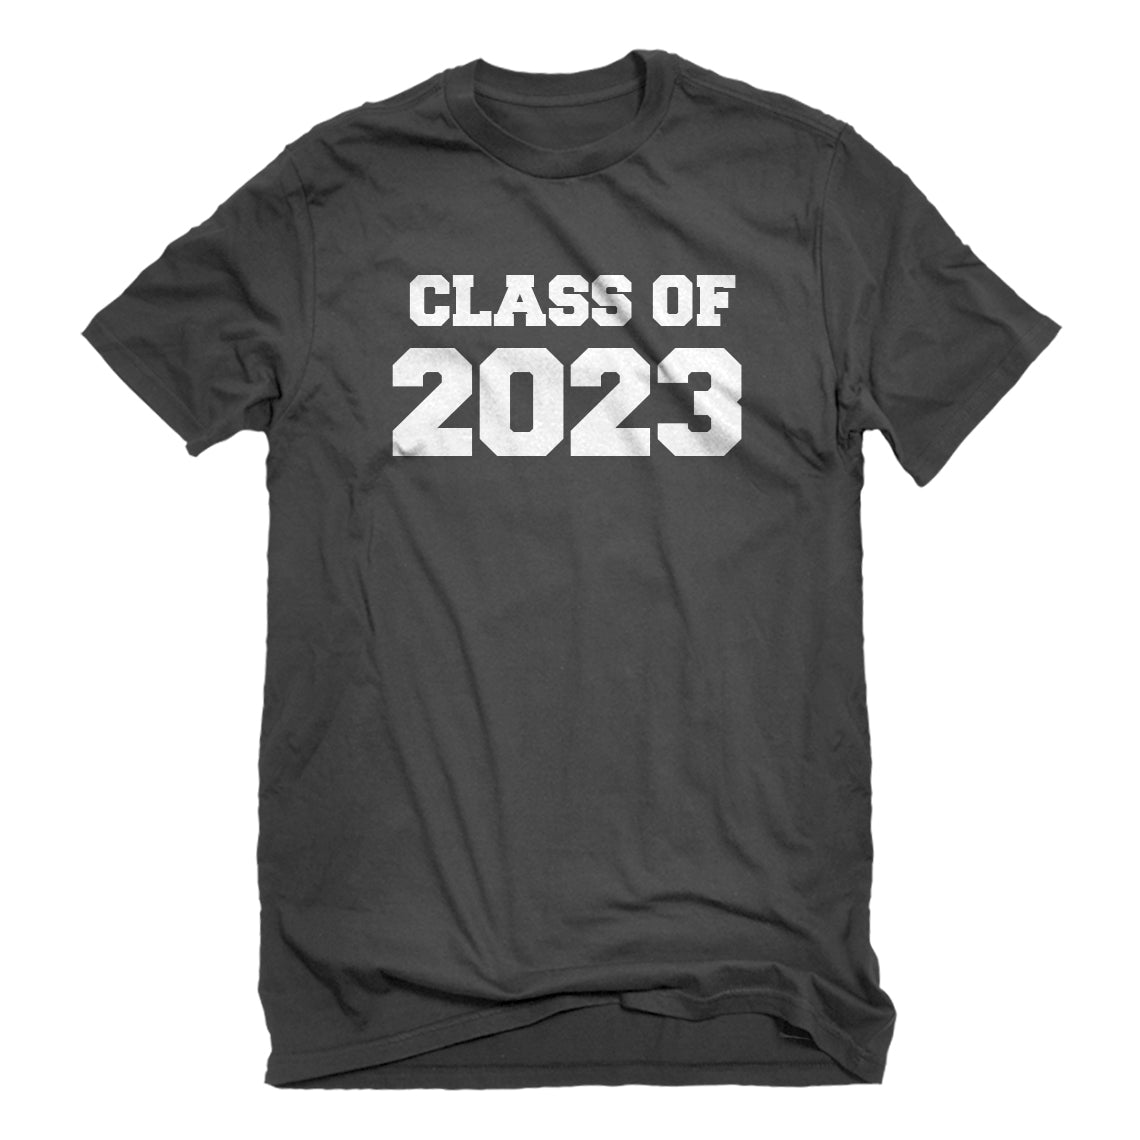 4 Four Squares T-Shirt For Men in 2023